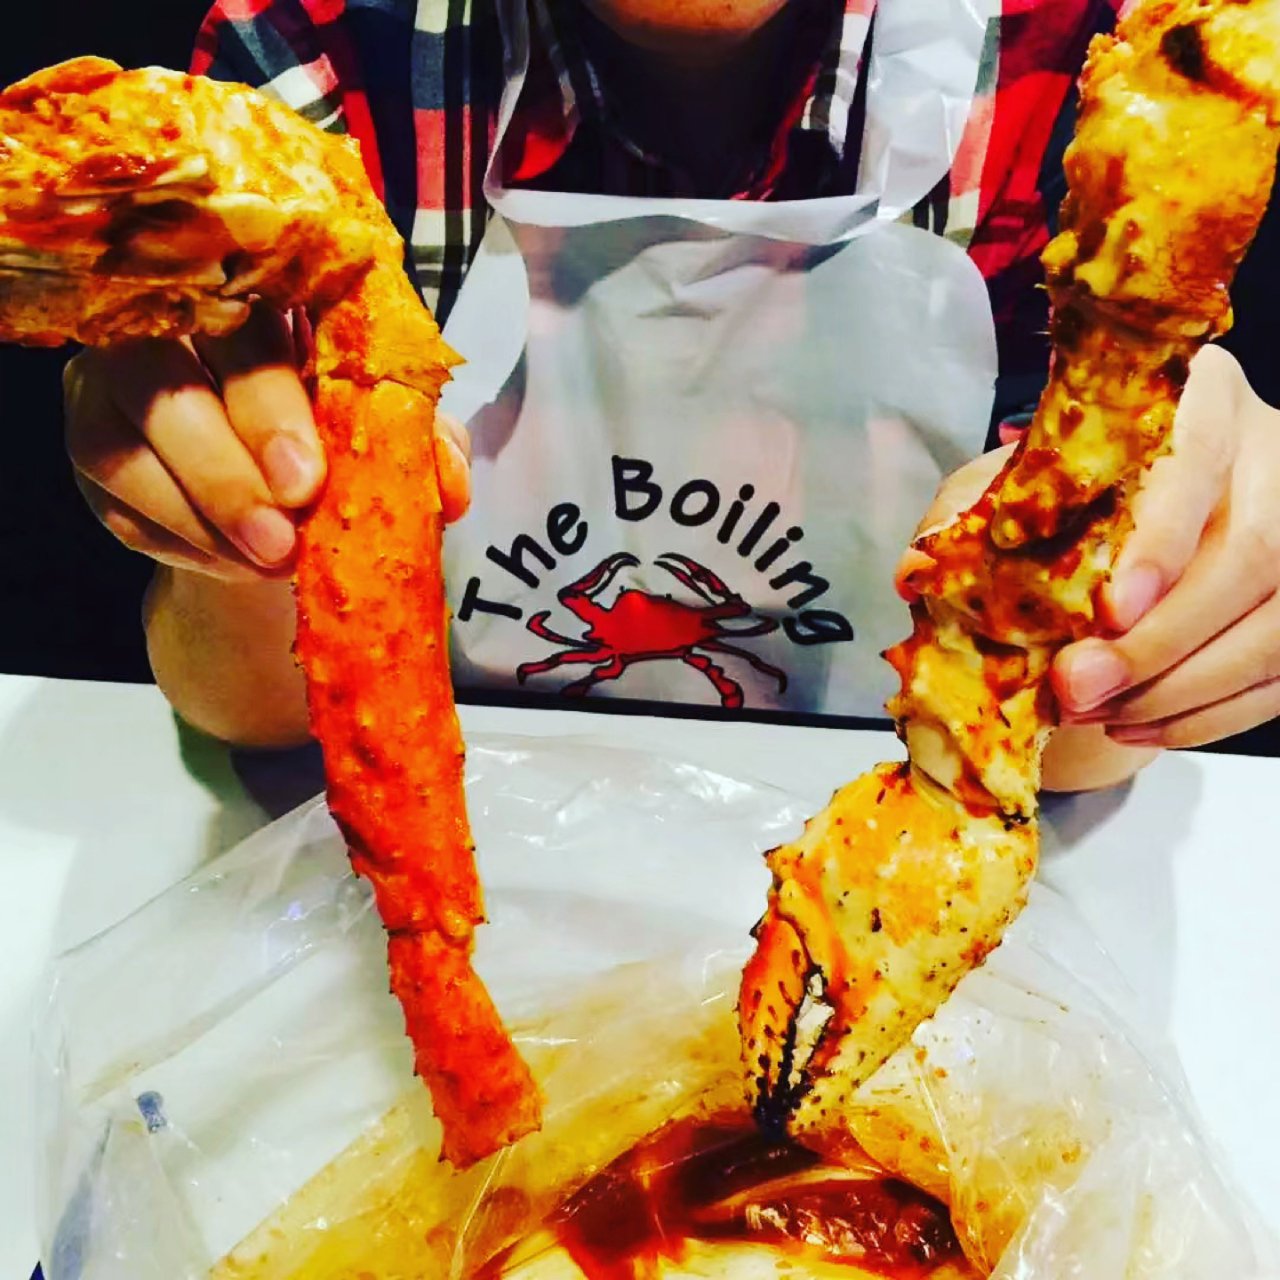 boiling crab